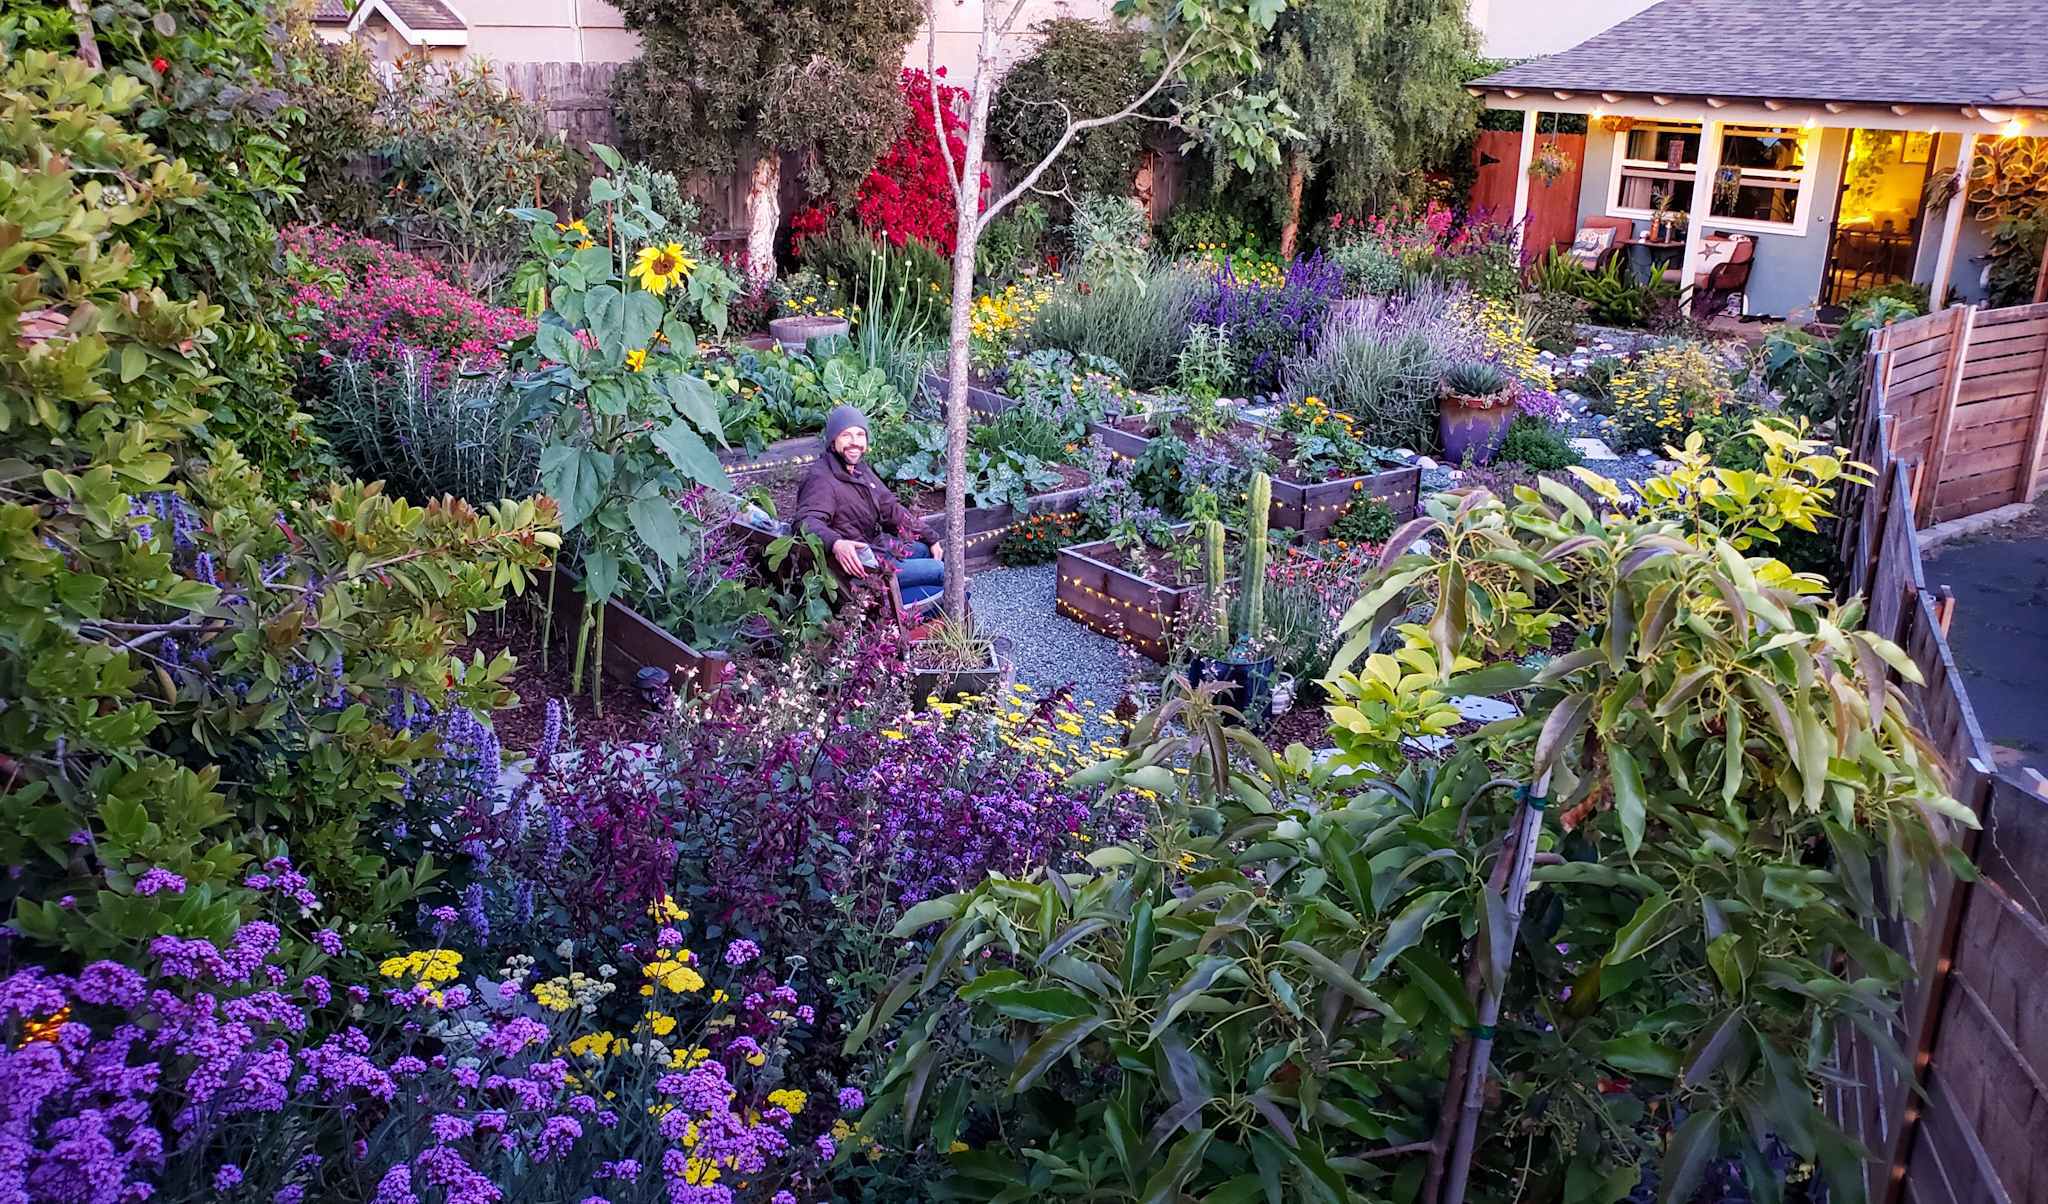 A photo of front yard garden in teh evening hours. A small blue house is in the background. The yard is full of purple, yellow, and pink flowers, including yarrow, sunflowers, zinnia, salvia, scabiosa, verbena, nasturtium, lavender and more! A man sits on a bench in the middle of the yard, with a few wooden raised garden beds in the garden too. There is no grass, only flower beds surrounded by gravel and stone pathways, and twinkle lights around the beds and house, lit up in the evening hours.